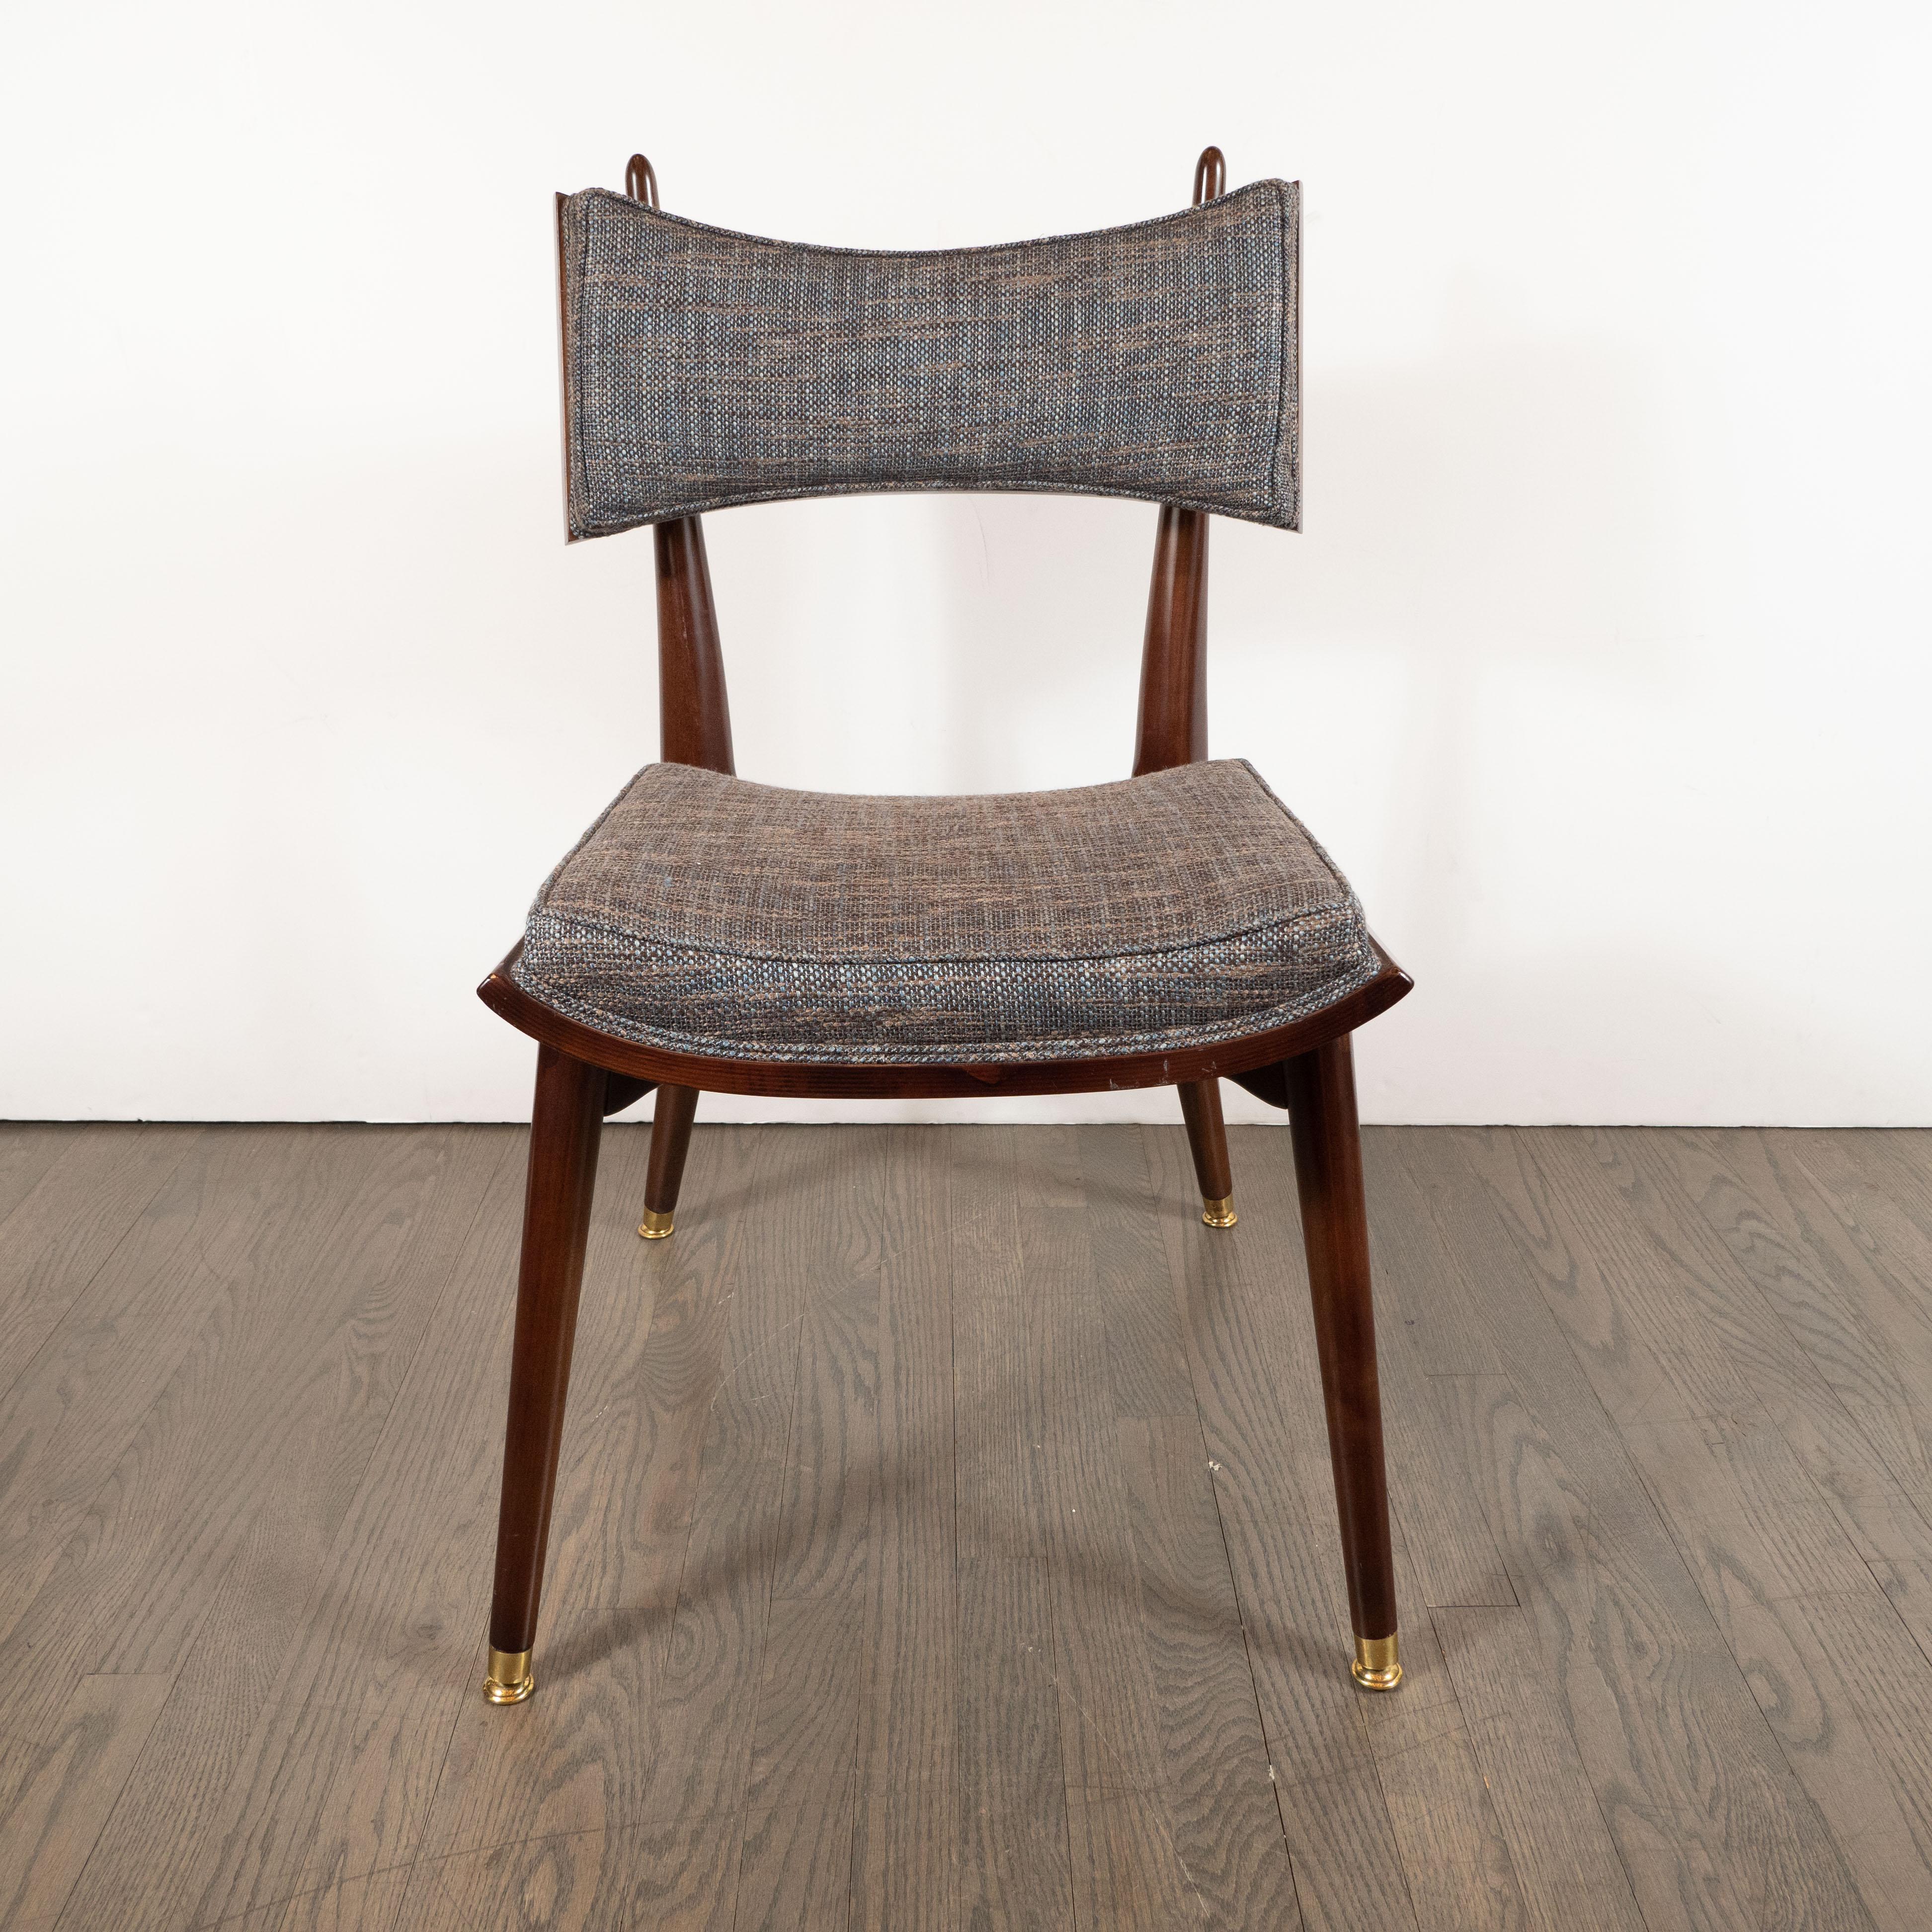 This rare and dramatic side chair was realized by the esteemed Mid-Century Modern Designer Harold Schwartz for the Romweber Furniture Co. in America, circa 1960. Handmade in handrubbed walnut with brass details throughout, this chair offers